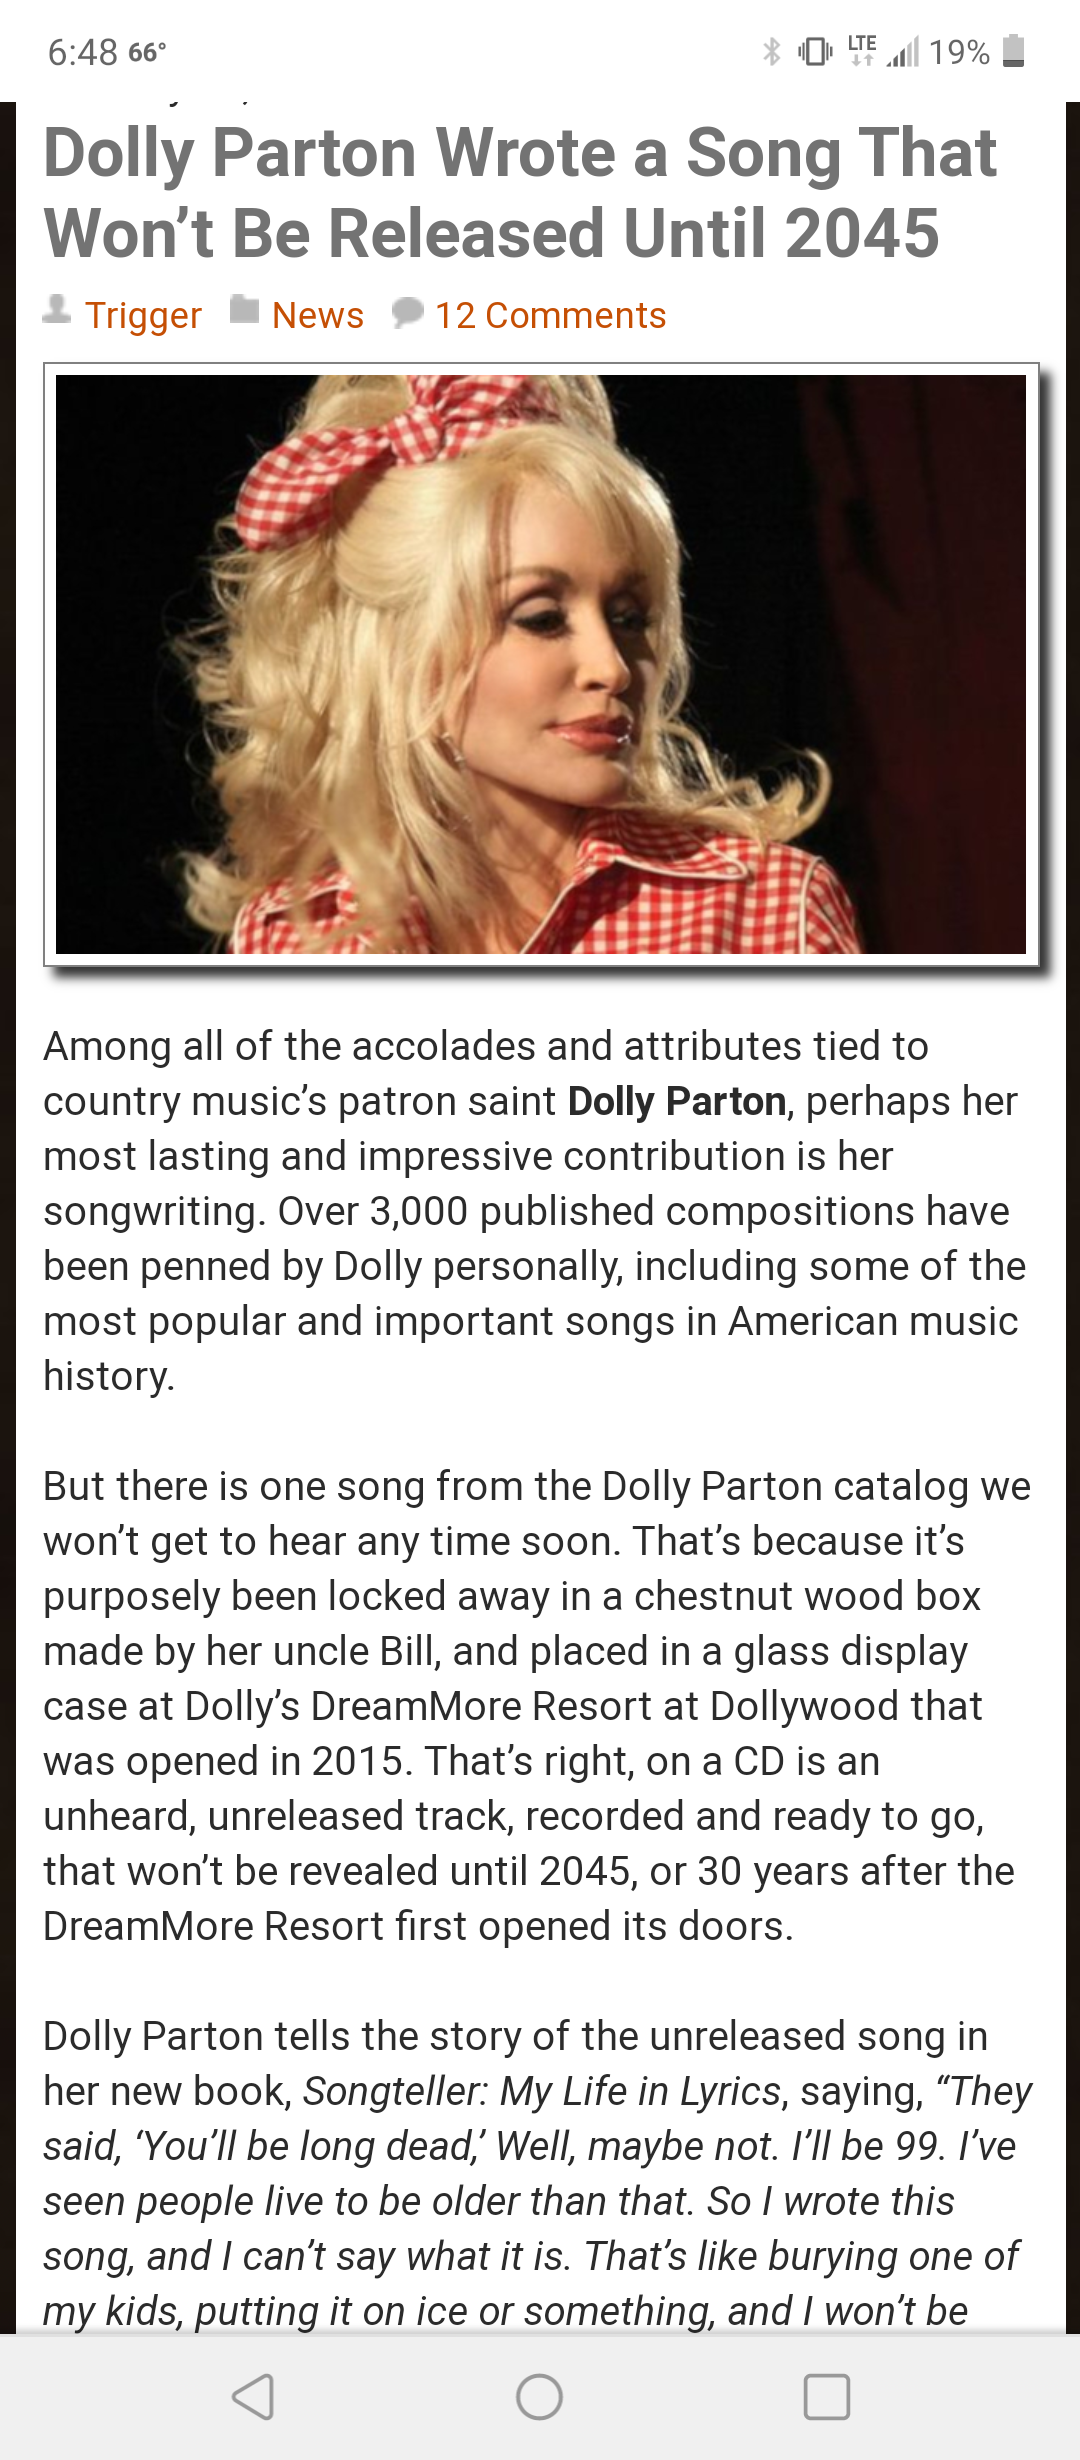 blond - 6.486 09.19% Dolly Parton Wrote a Song That Won't Be Released Until 2045 Trigger News 12 Among all of the accolades and attributes tied to country music's patron saint Dolly Parton, perhaps her most lasting and impressive contribution is her songw